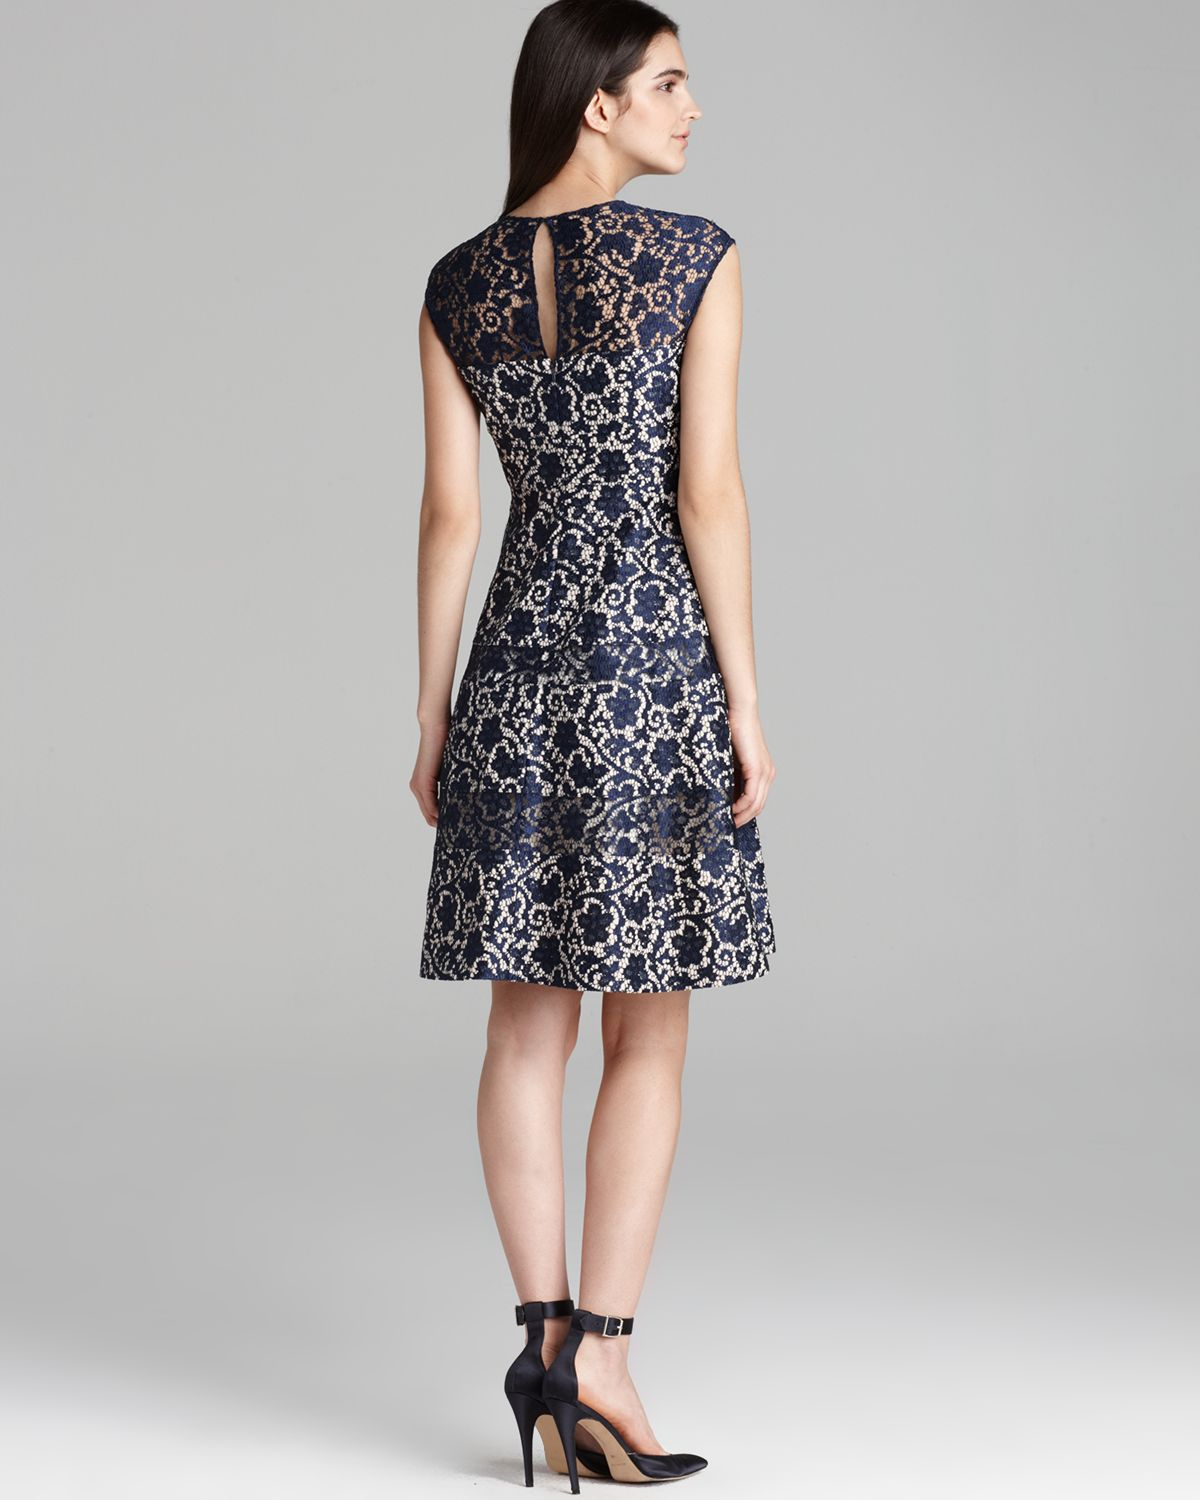 Lyst - Kay Unger Fit and Flare Bonded Lace Dress Cap Sleeve in Blue